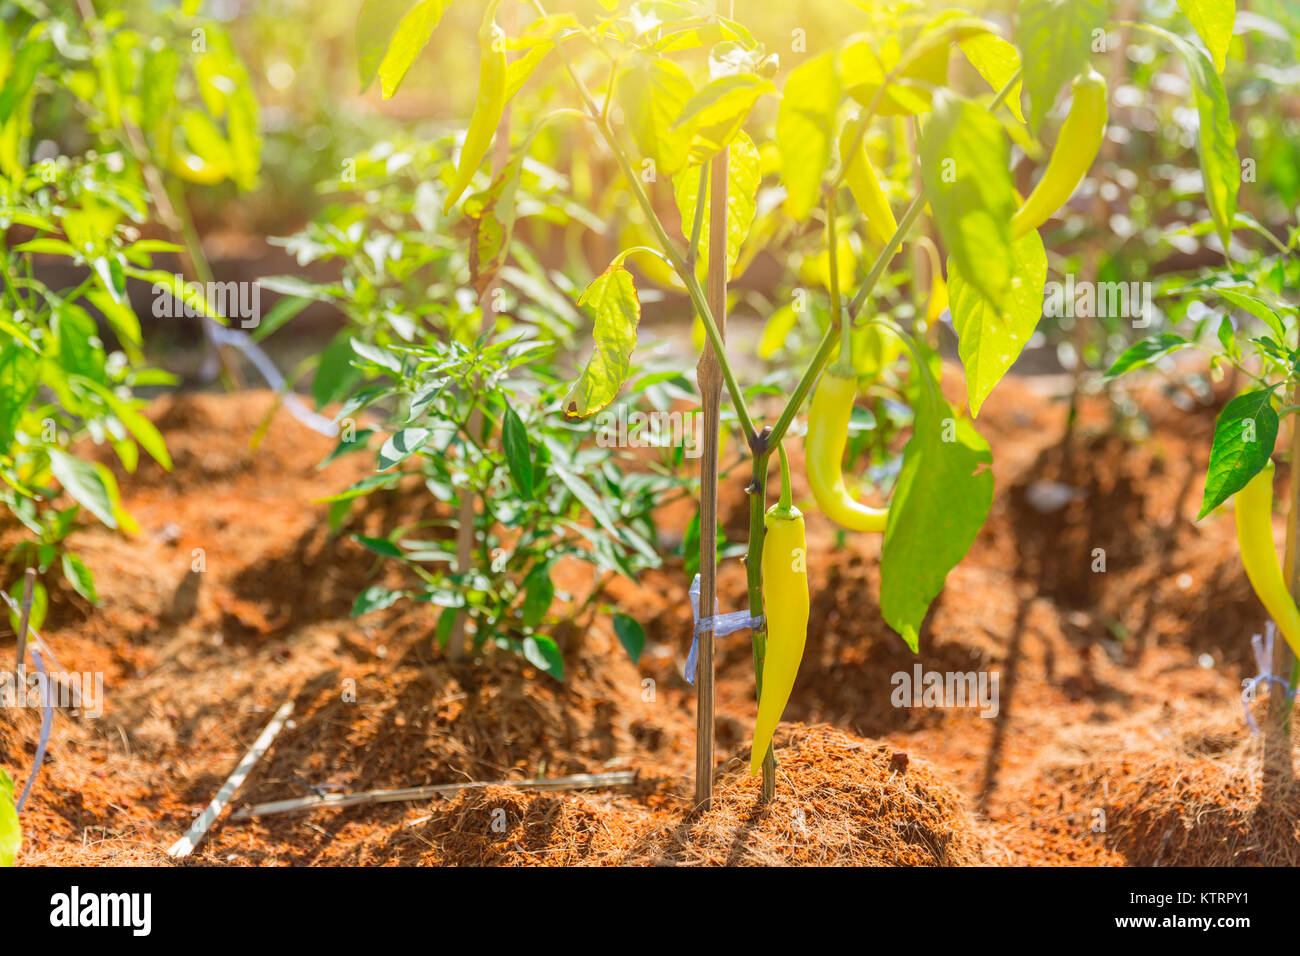 Green Sweet Chilli Plant in Home Garden Stock Photo